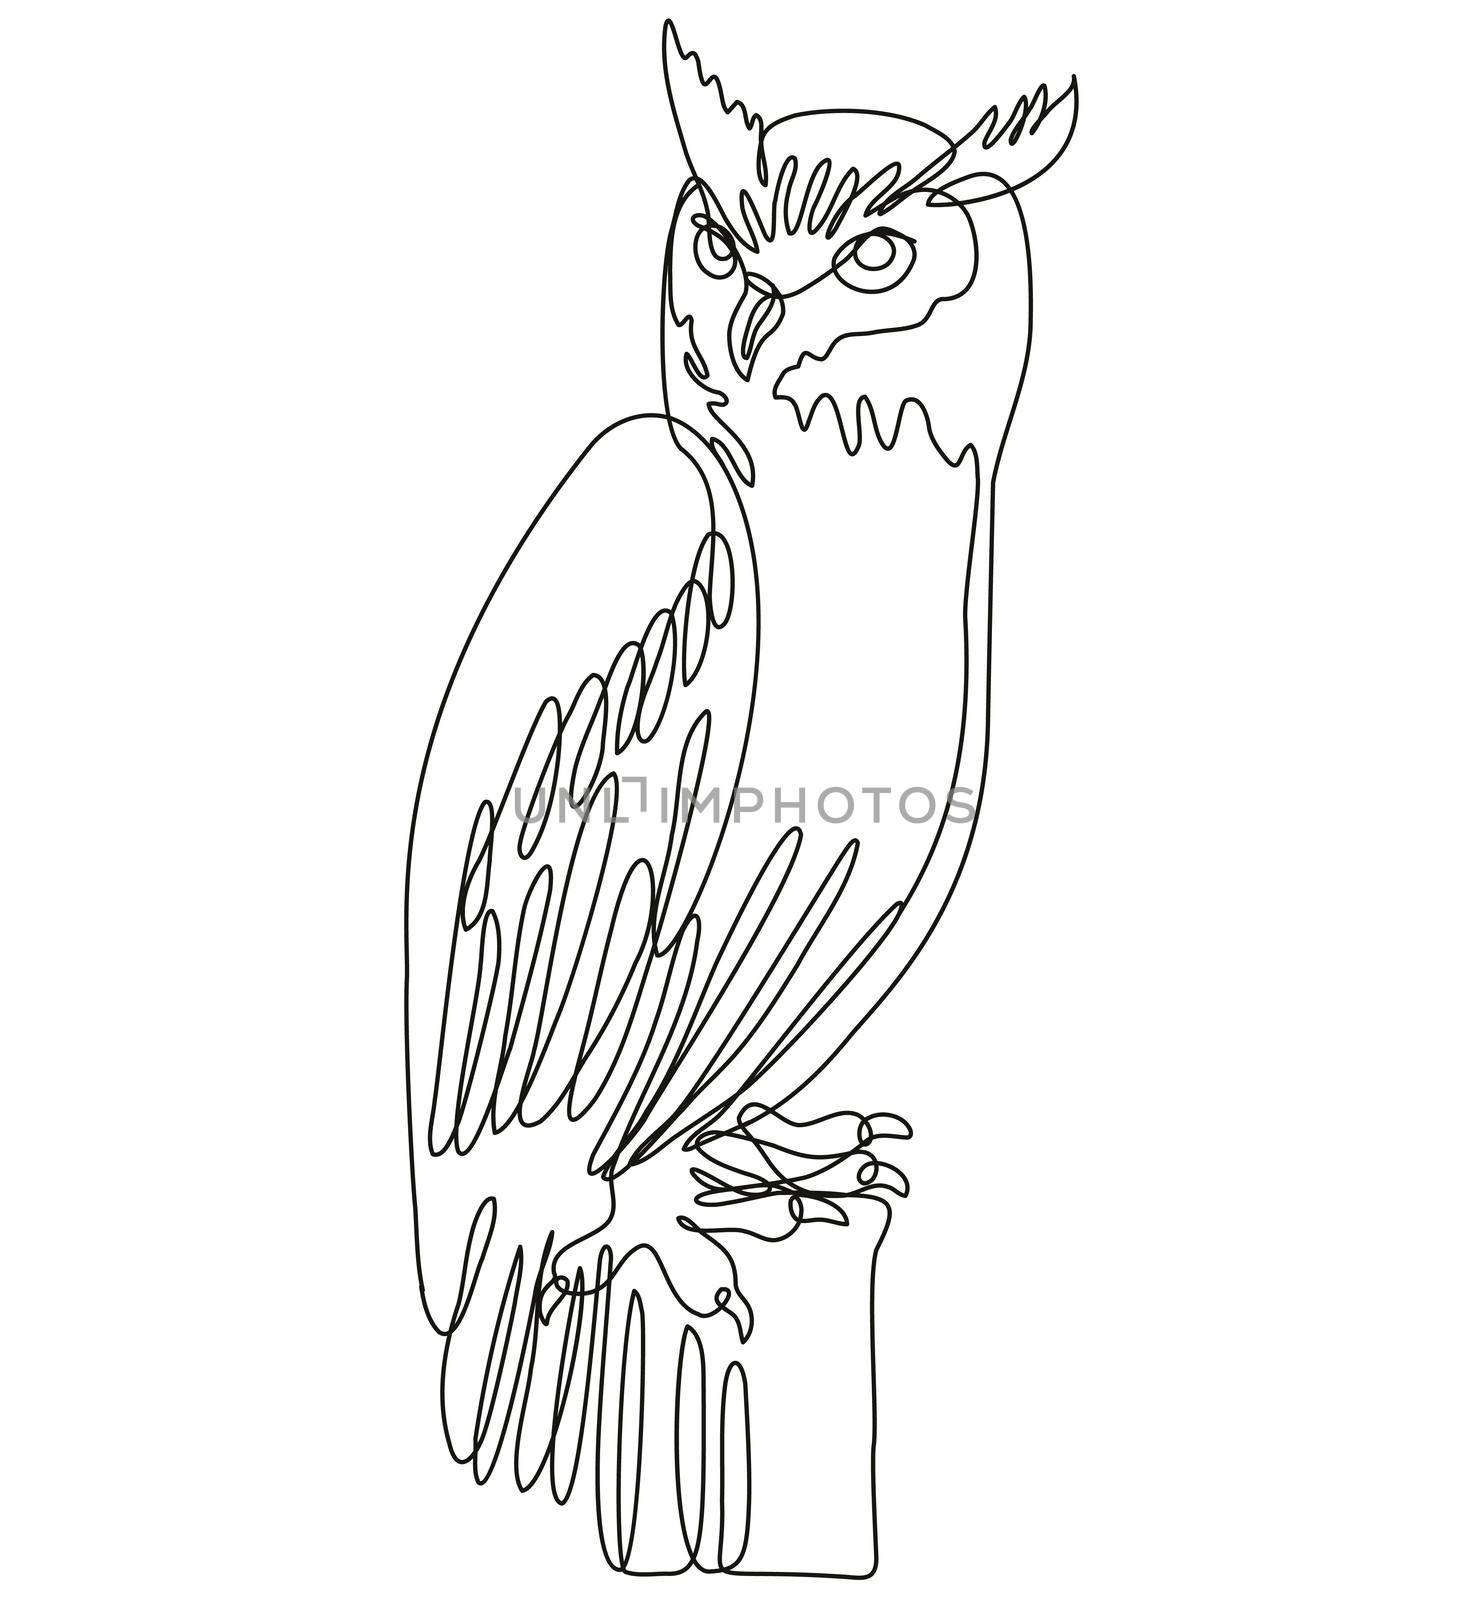 Continuous line drawing illustration of a tiger owl or great horned owl perching on tree stump done in mono line or doodle style in black and white on isolated background. 